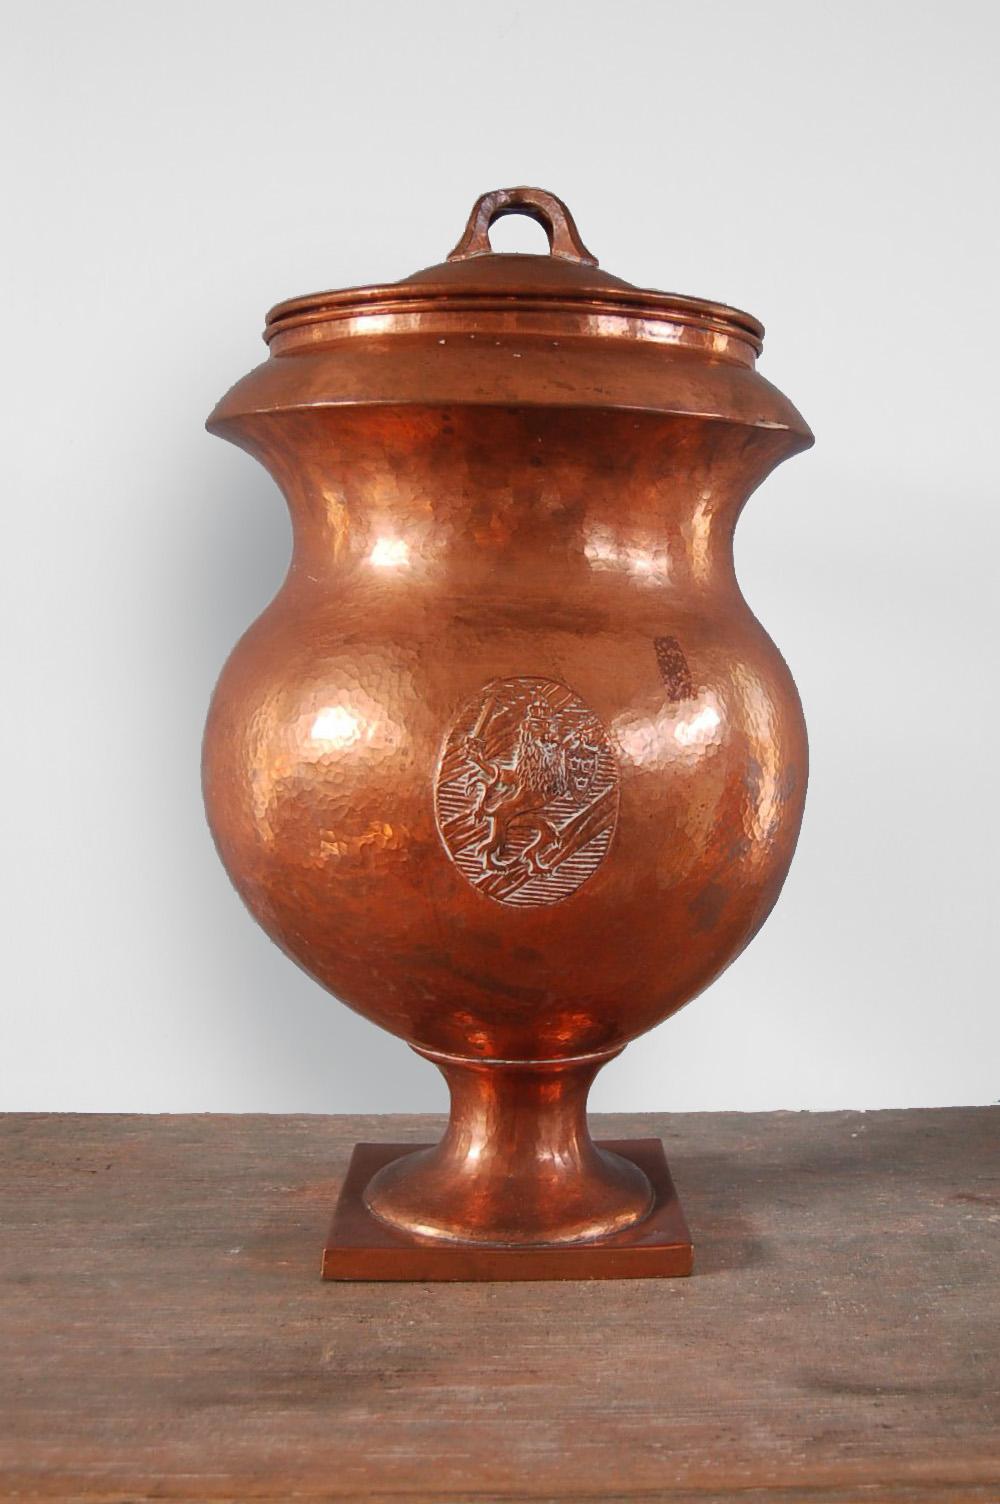 Hand-Crafted Large Hammered Copper Covered Urn with Coat of Arms/Lions, Swedish, circa 1820